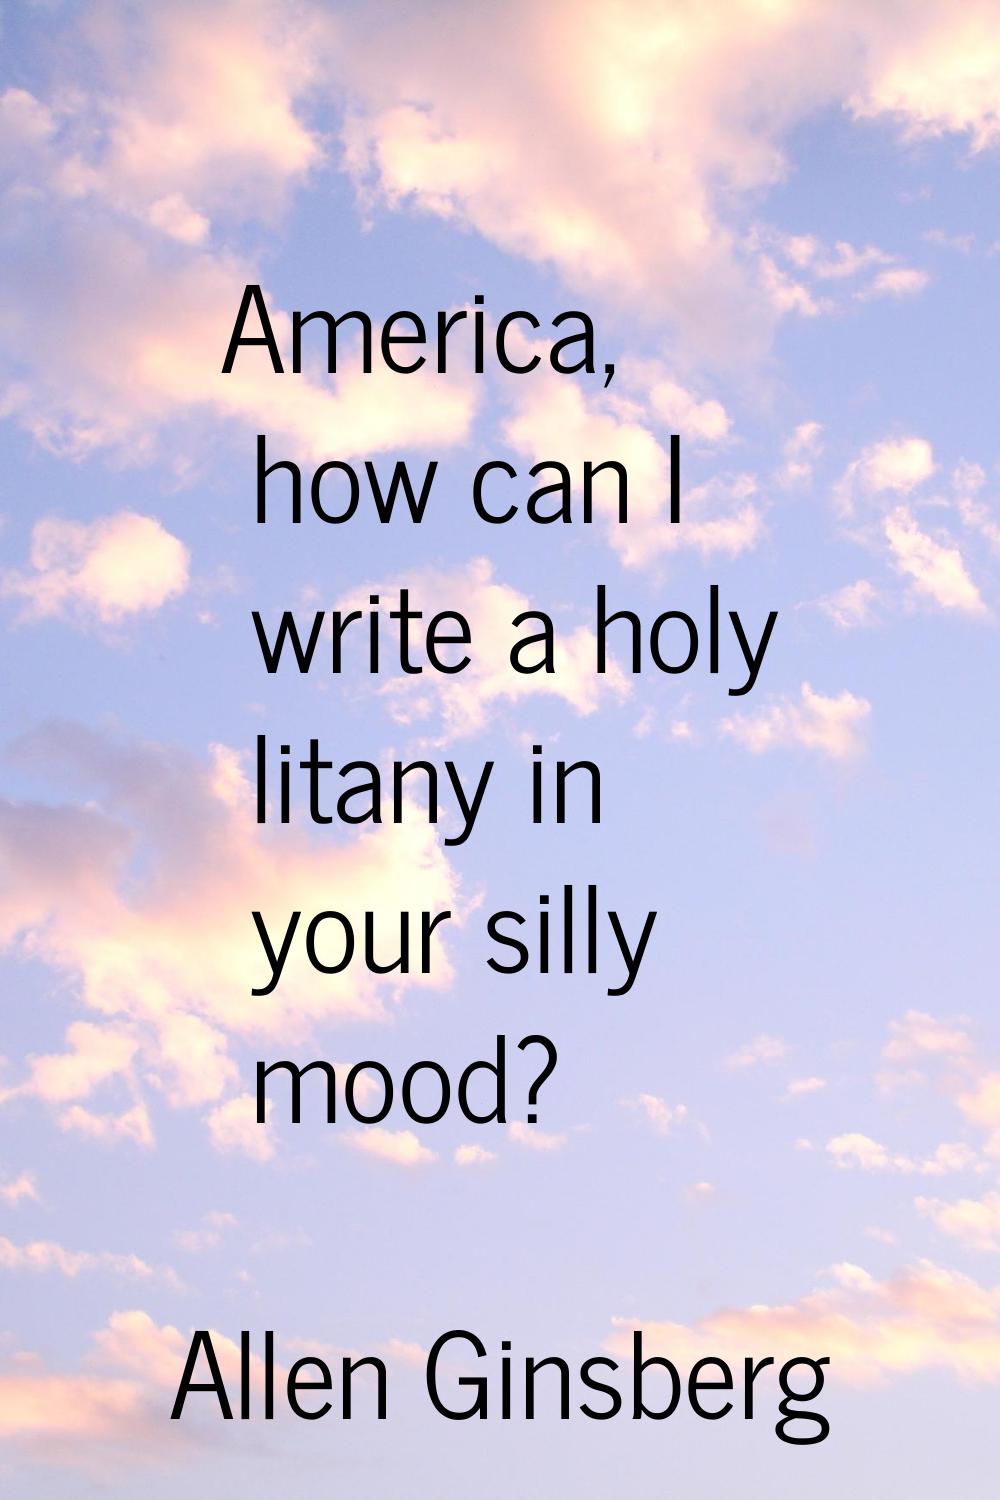 America, how can I write a holy litany in your silly mood?